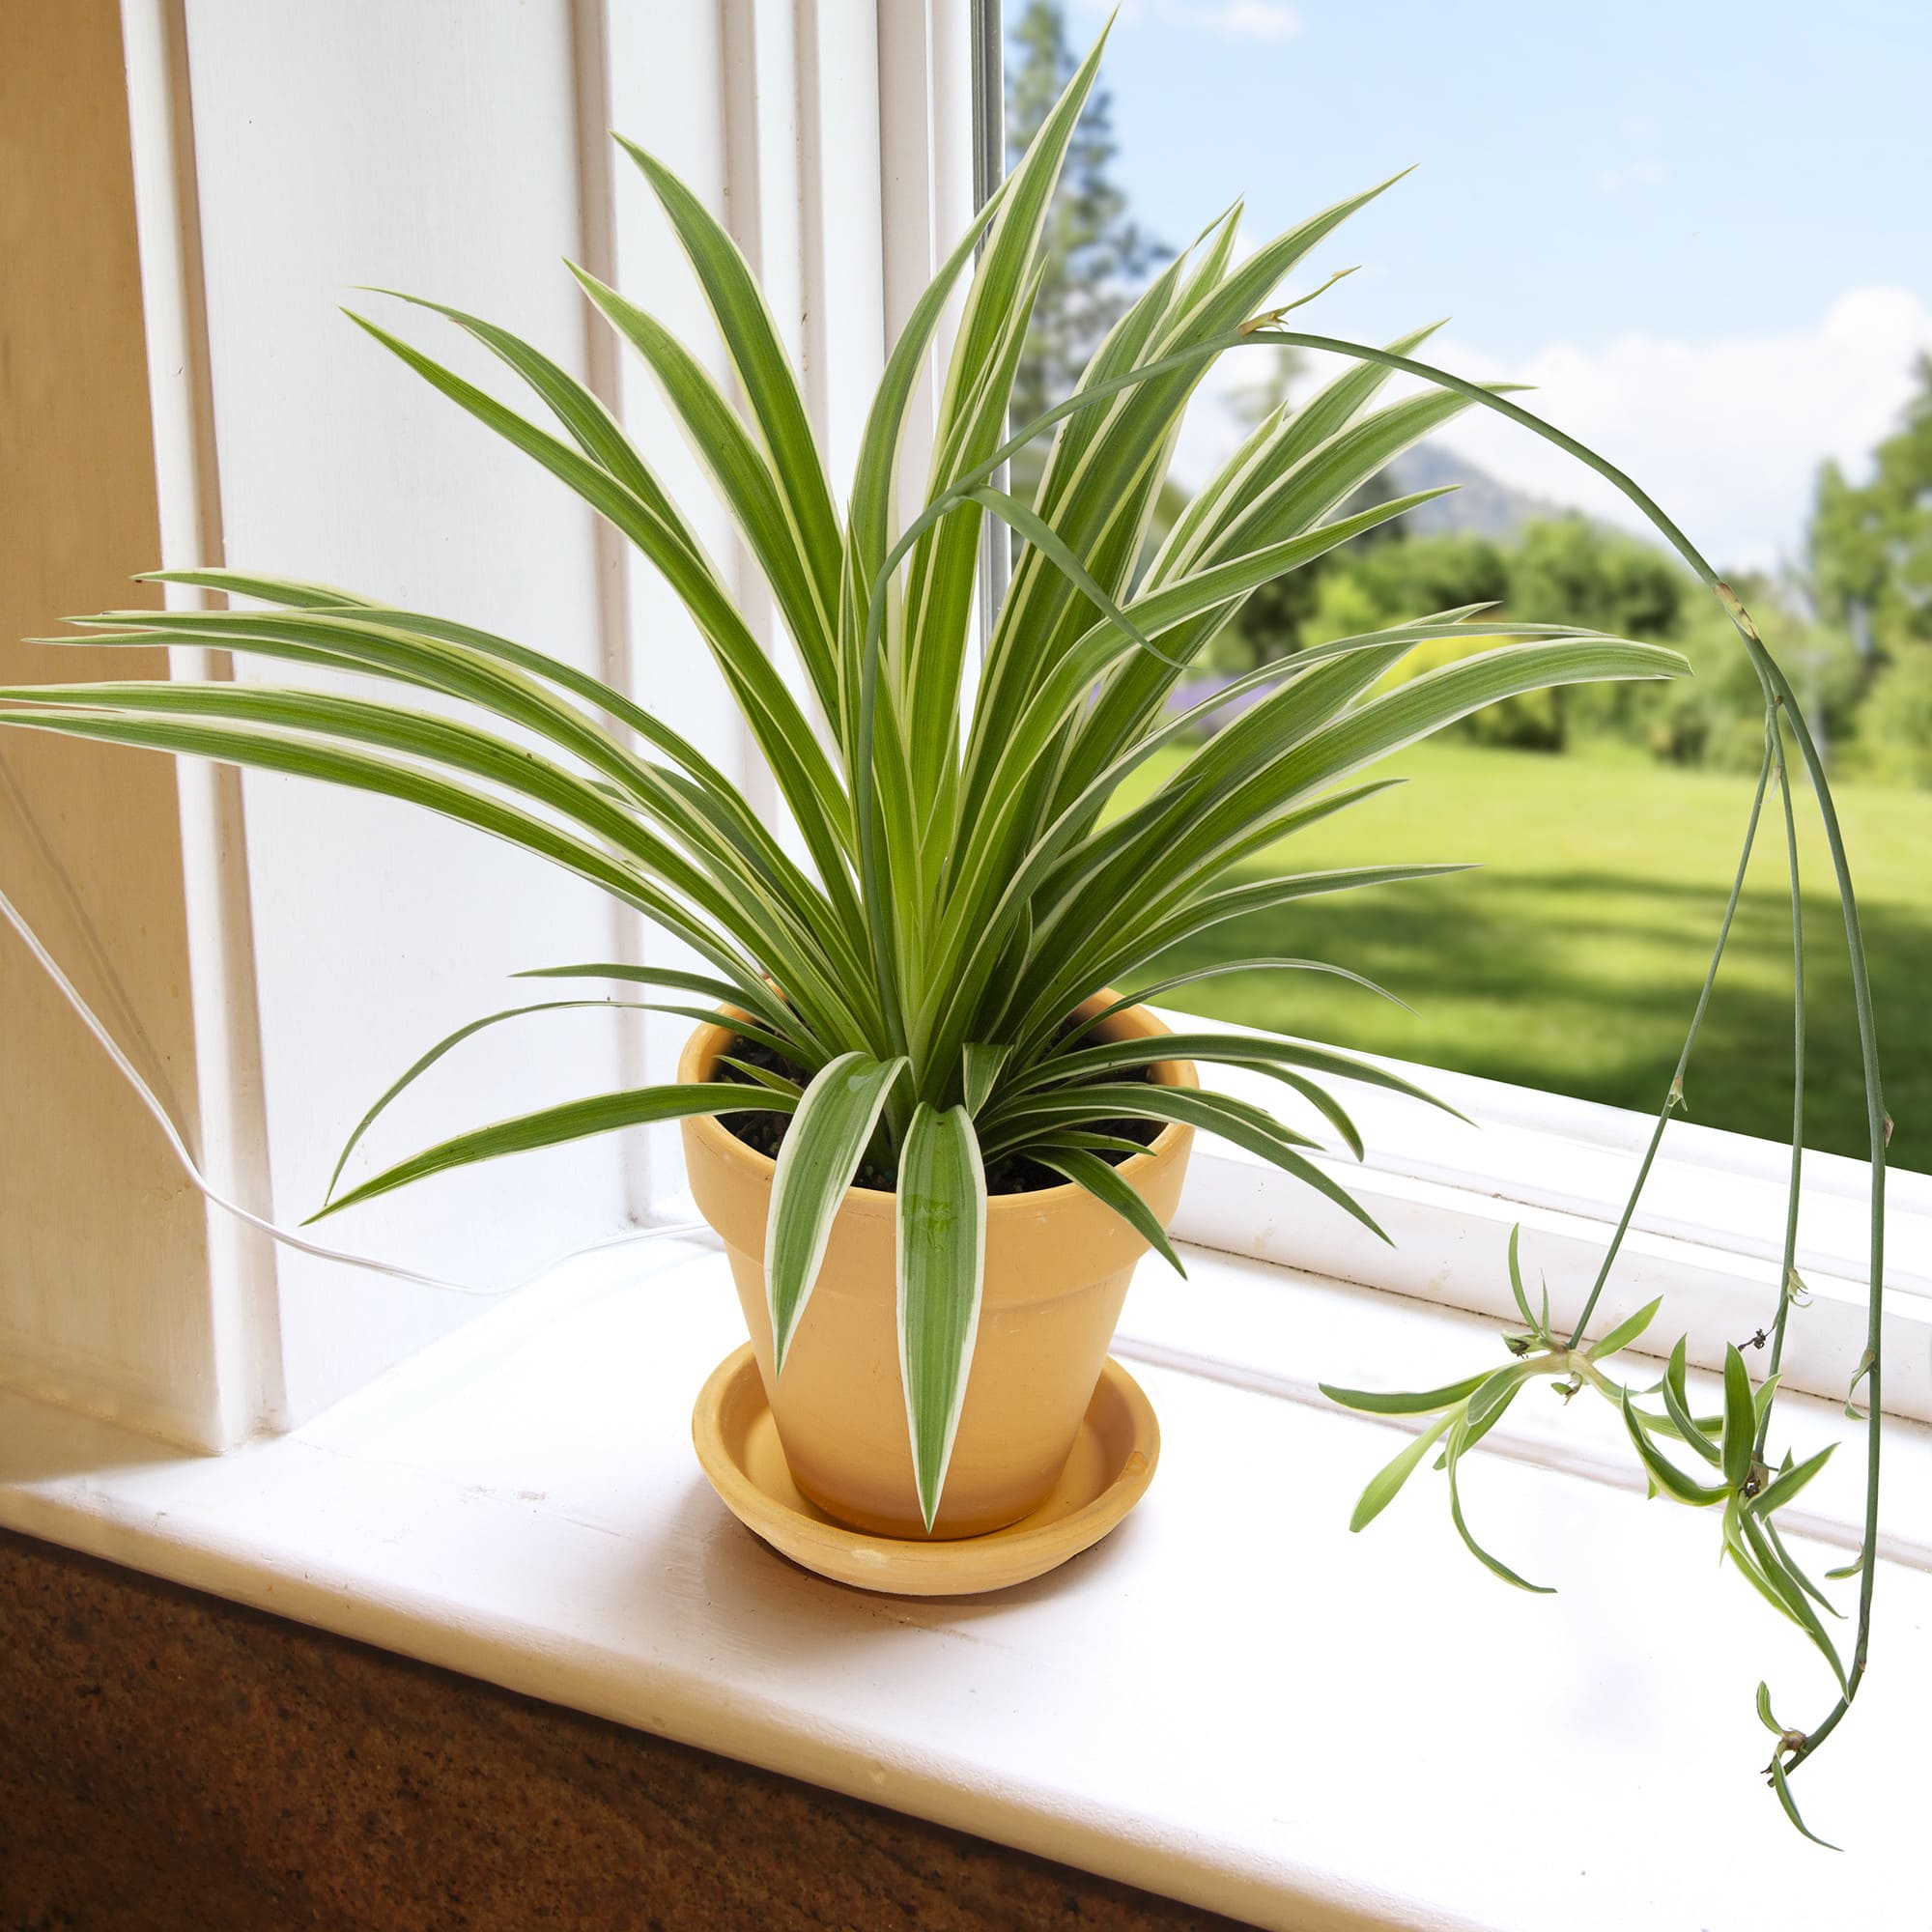 6 houseplants that can increase your well-being - 47